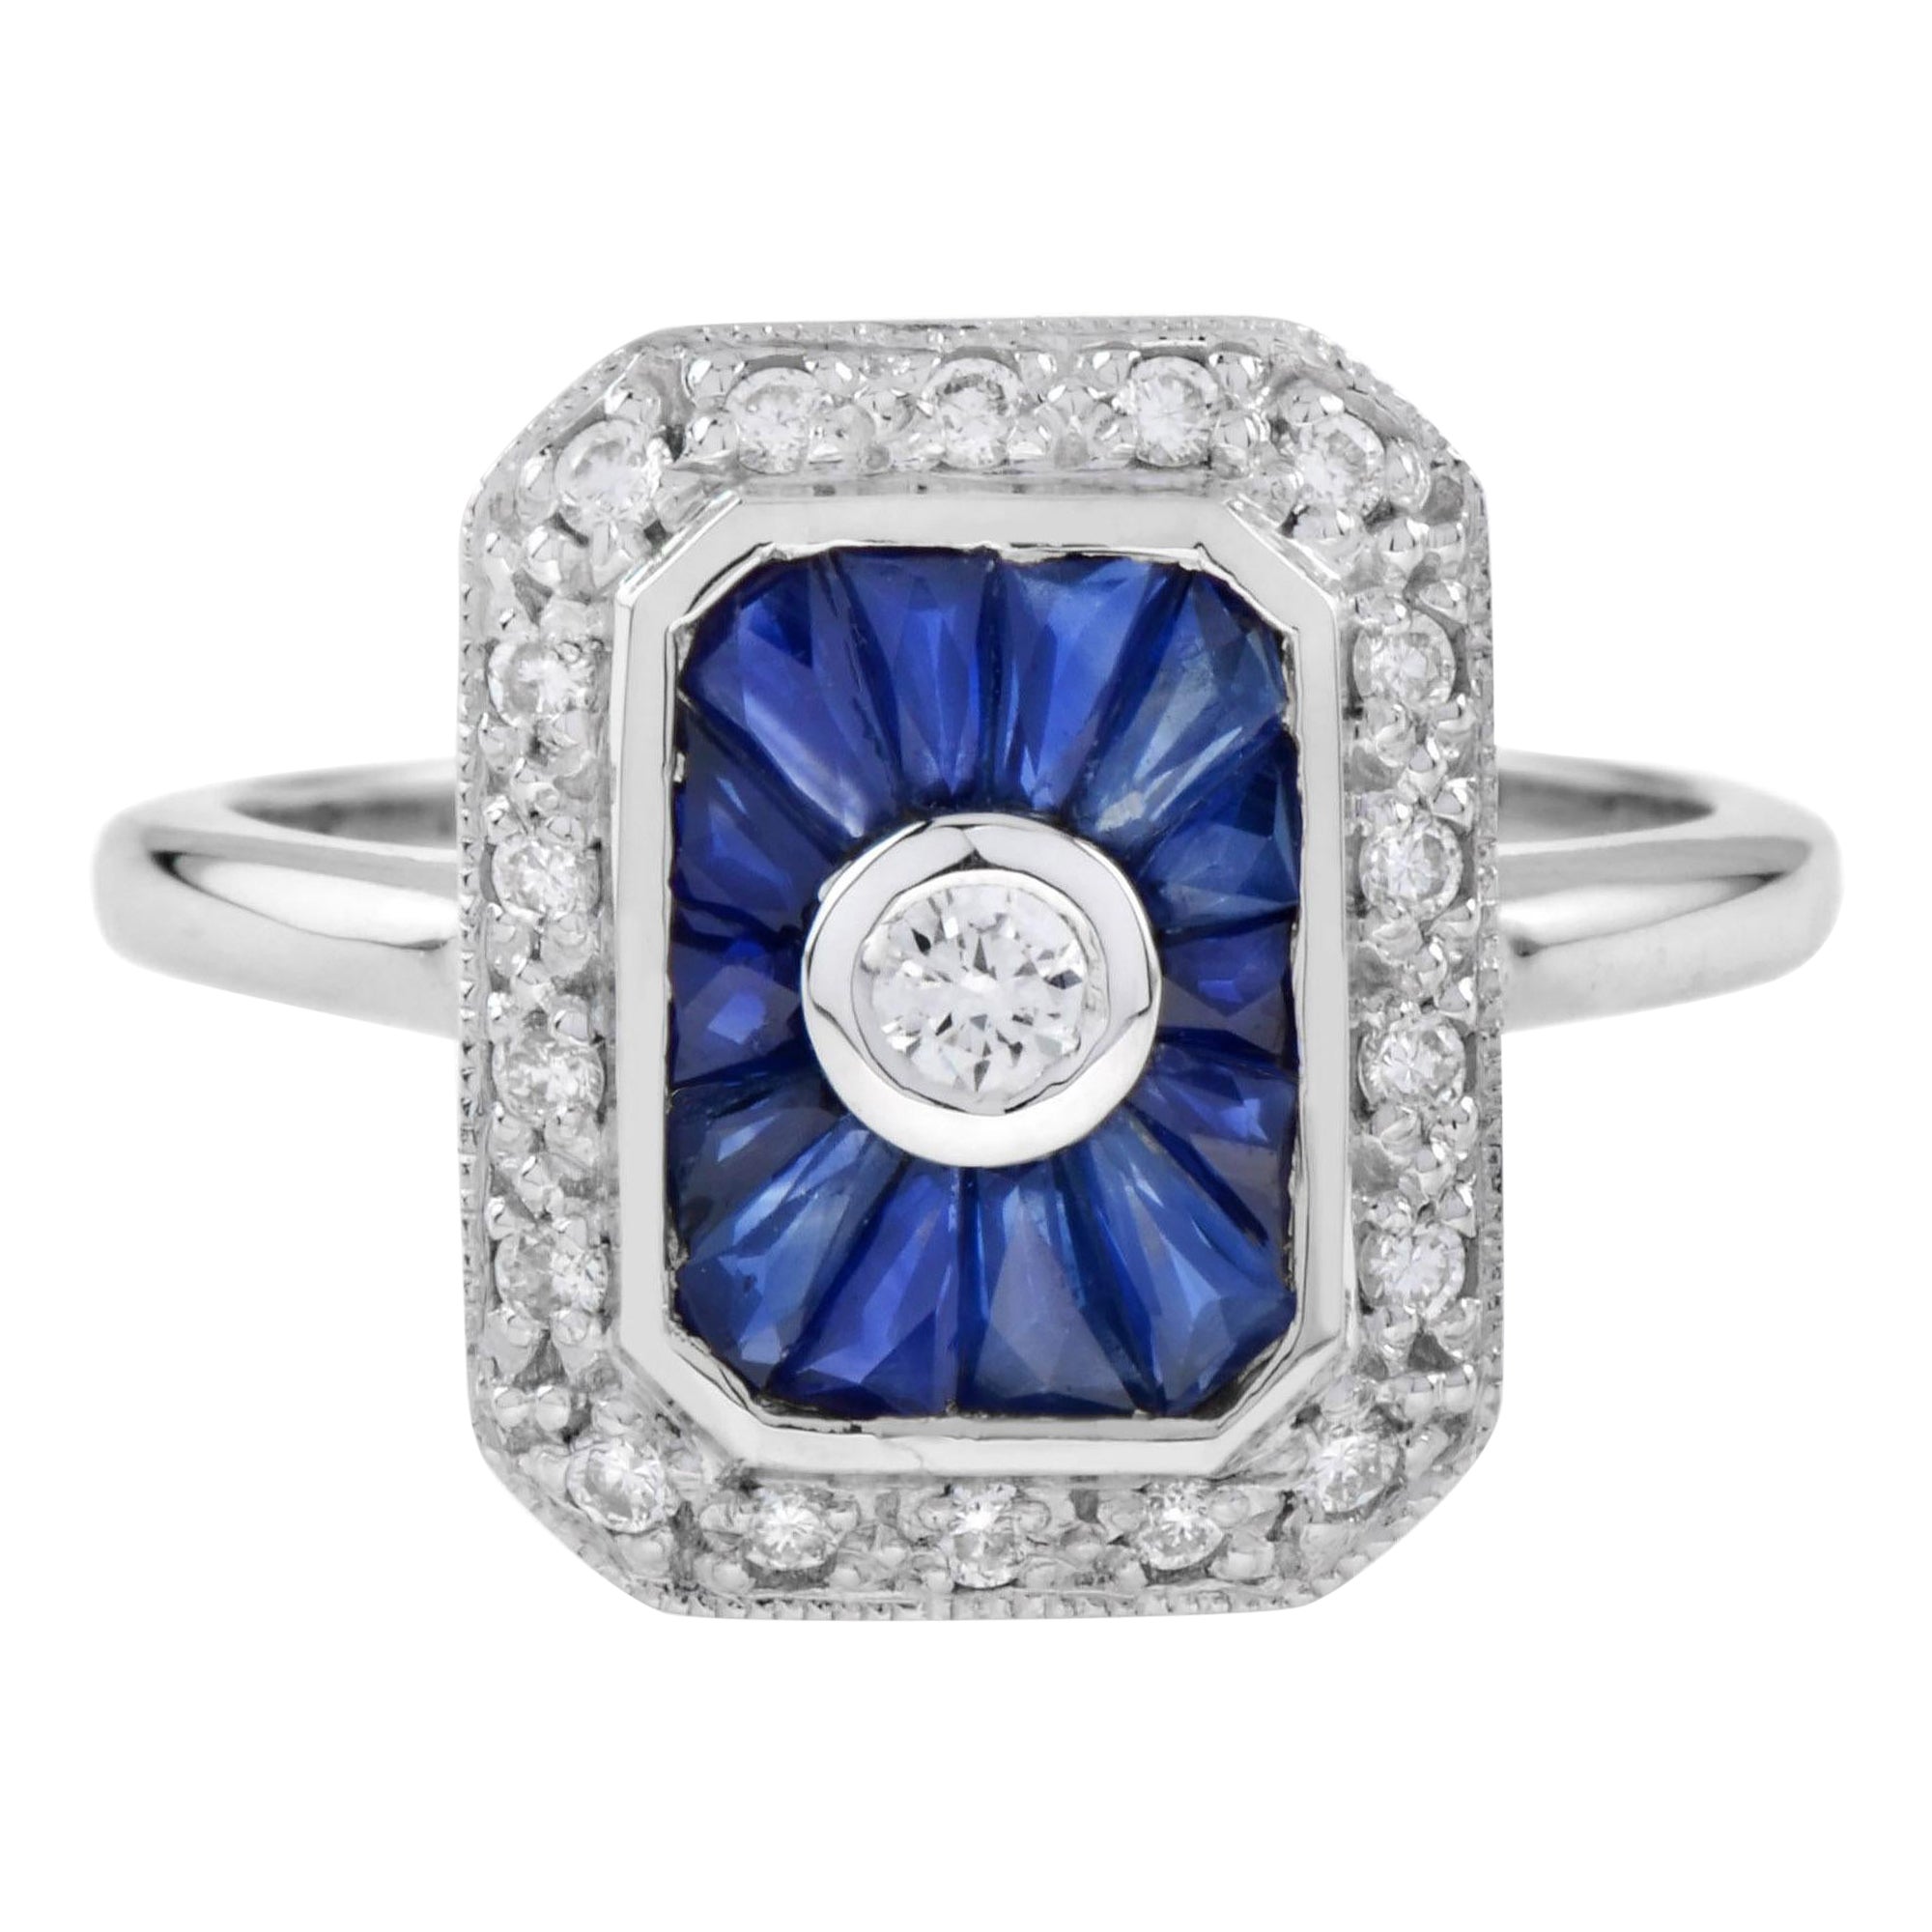 Diamond and Sapphire Art Deco Style Engagement Ring in 9K White Gold